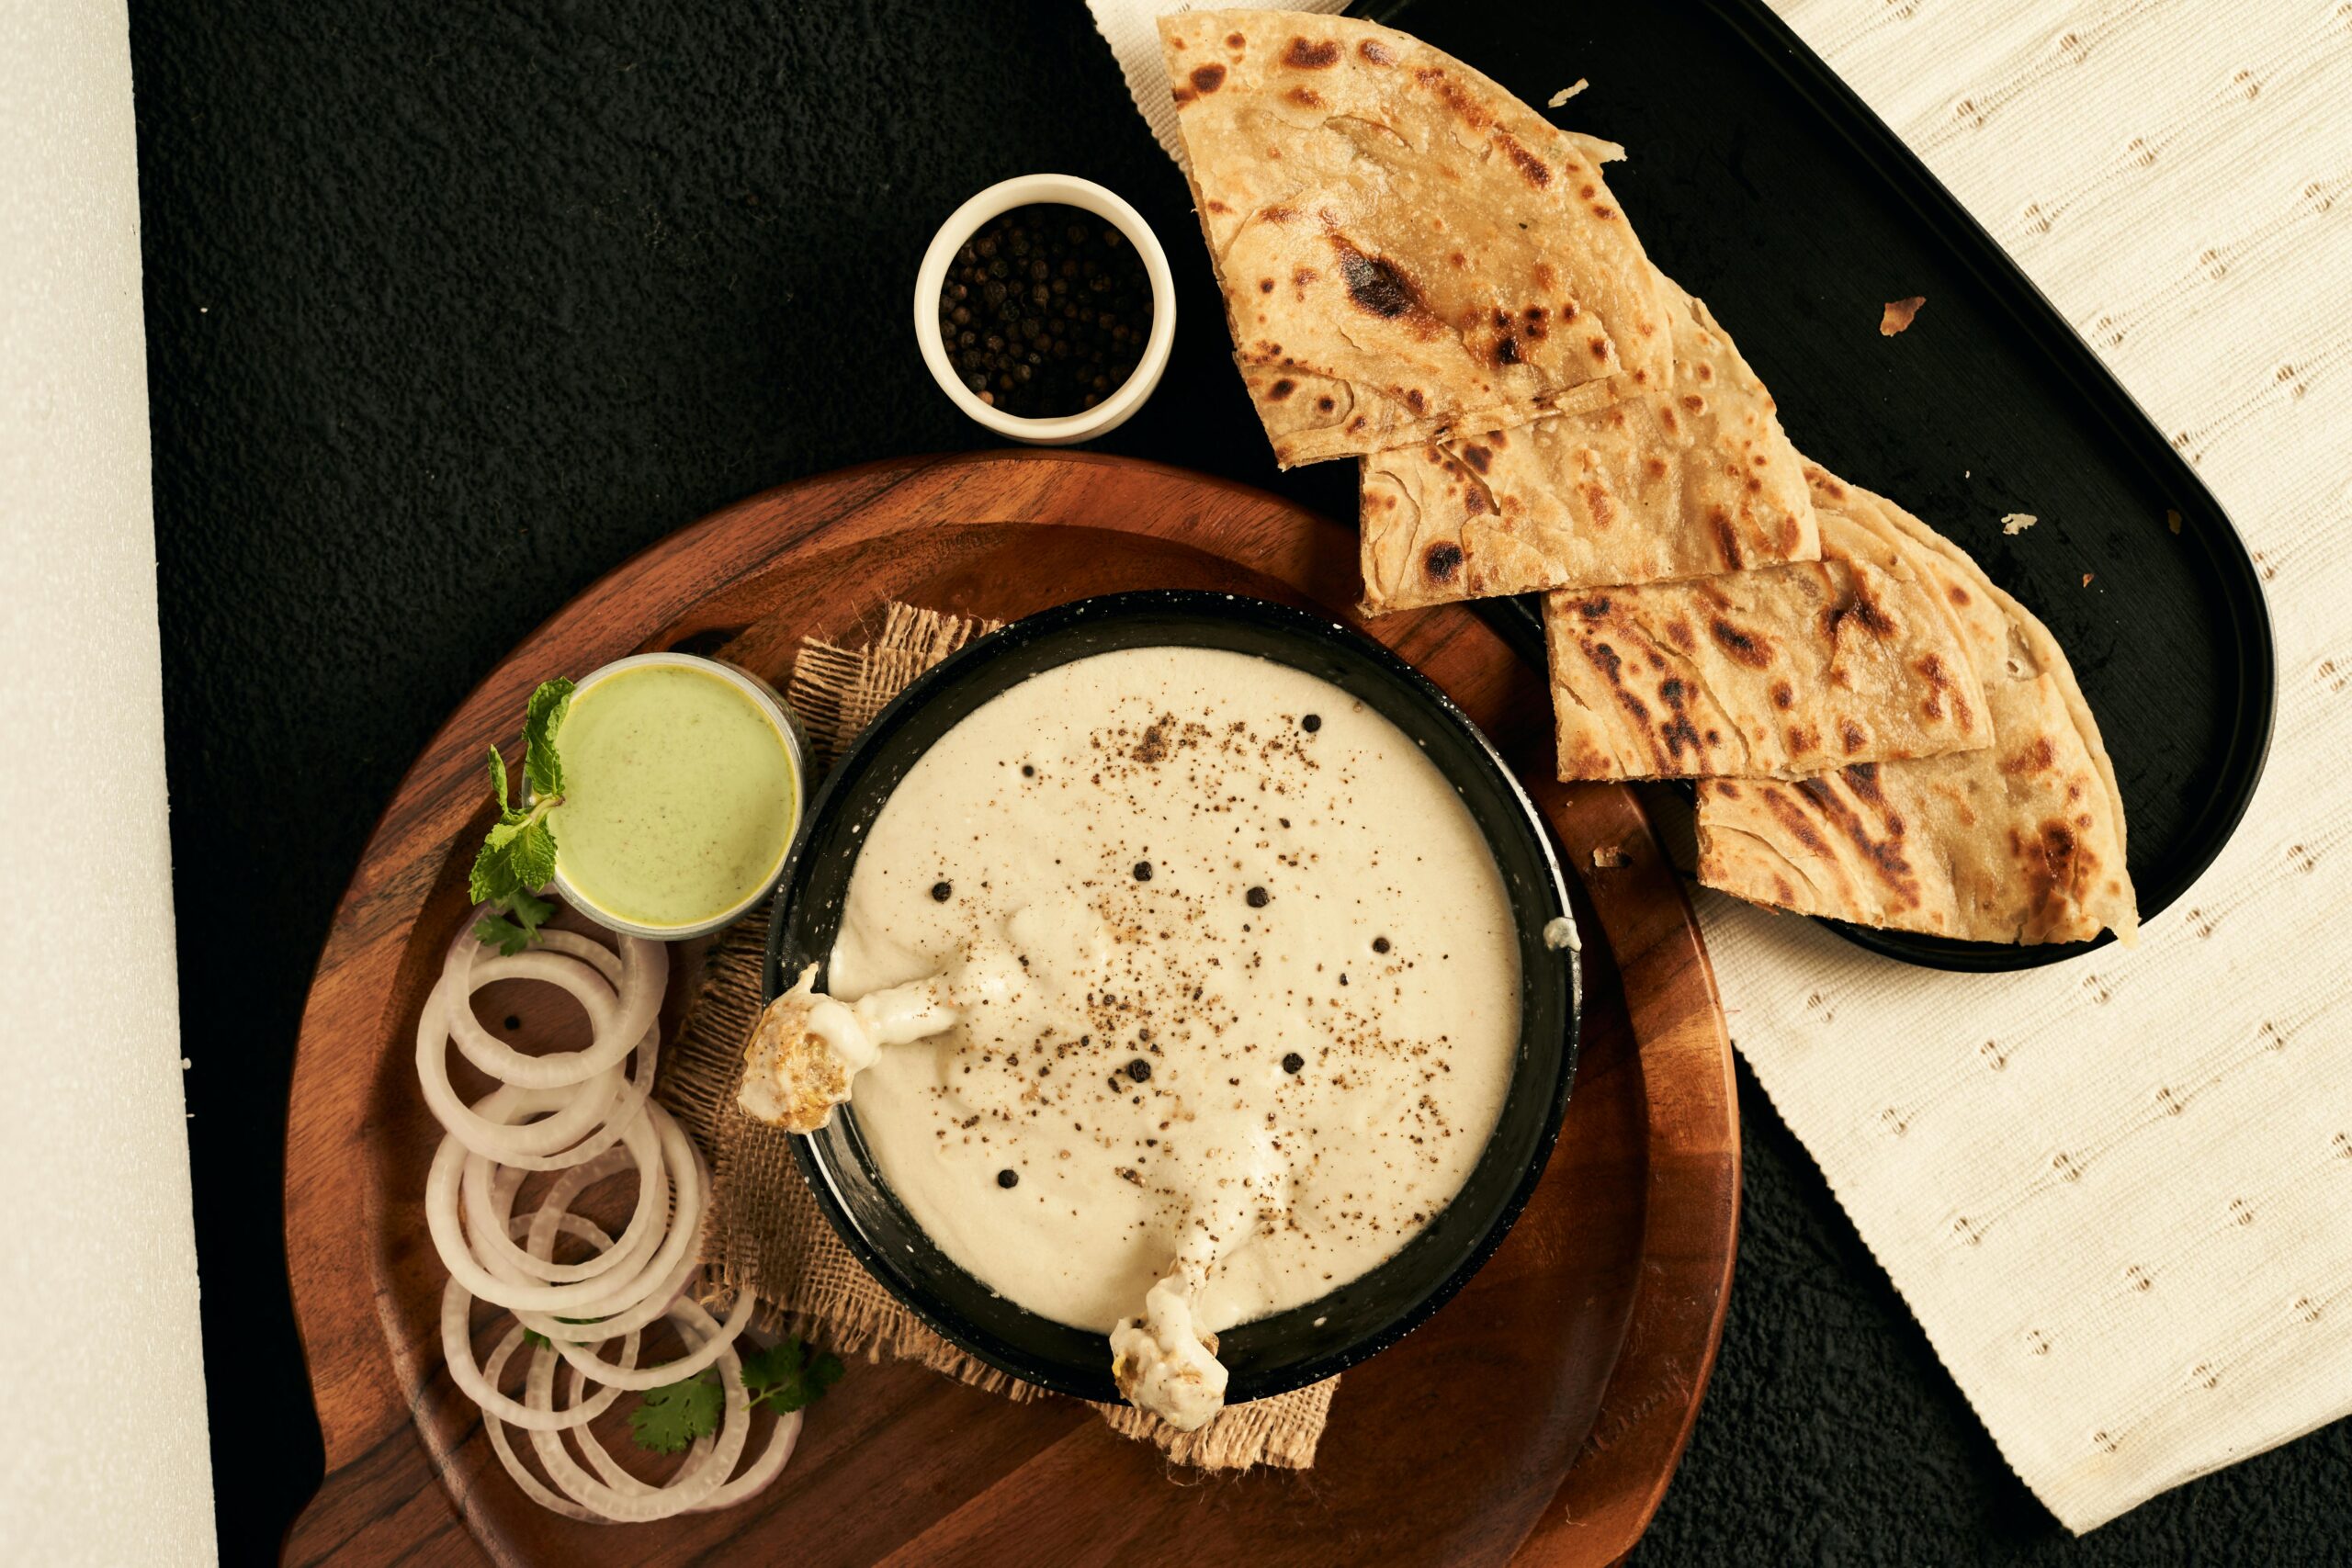 Try your hand at making the cottage cheese flatbread recipe from TikTok. Pictured: Flatbread with ingredients